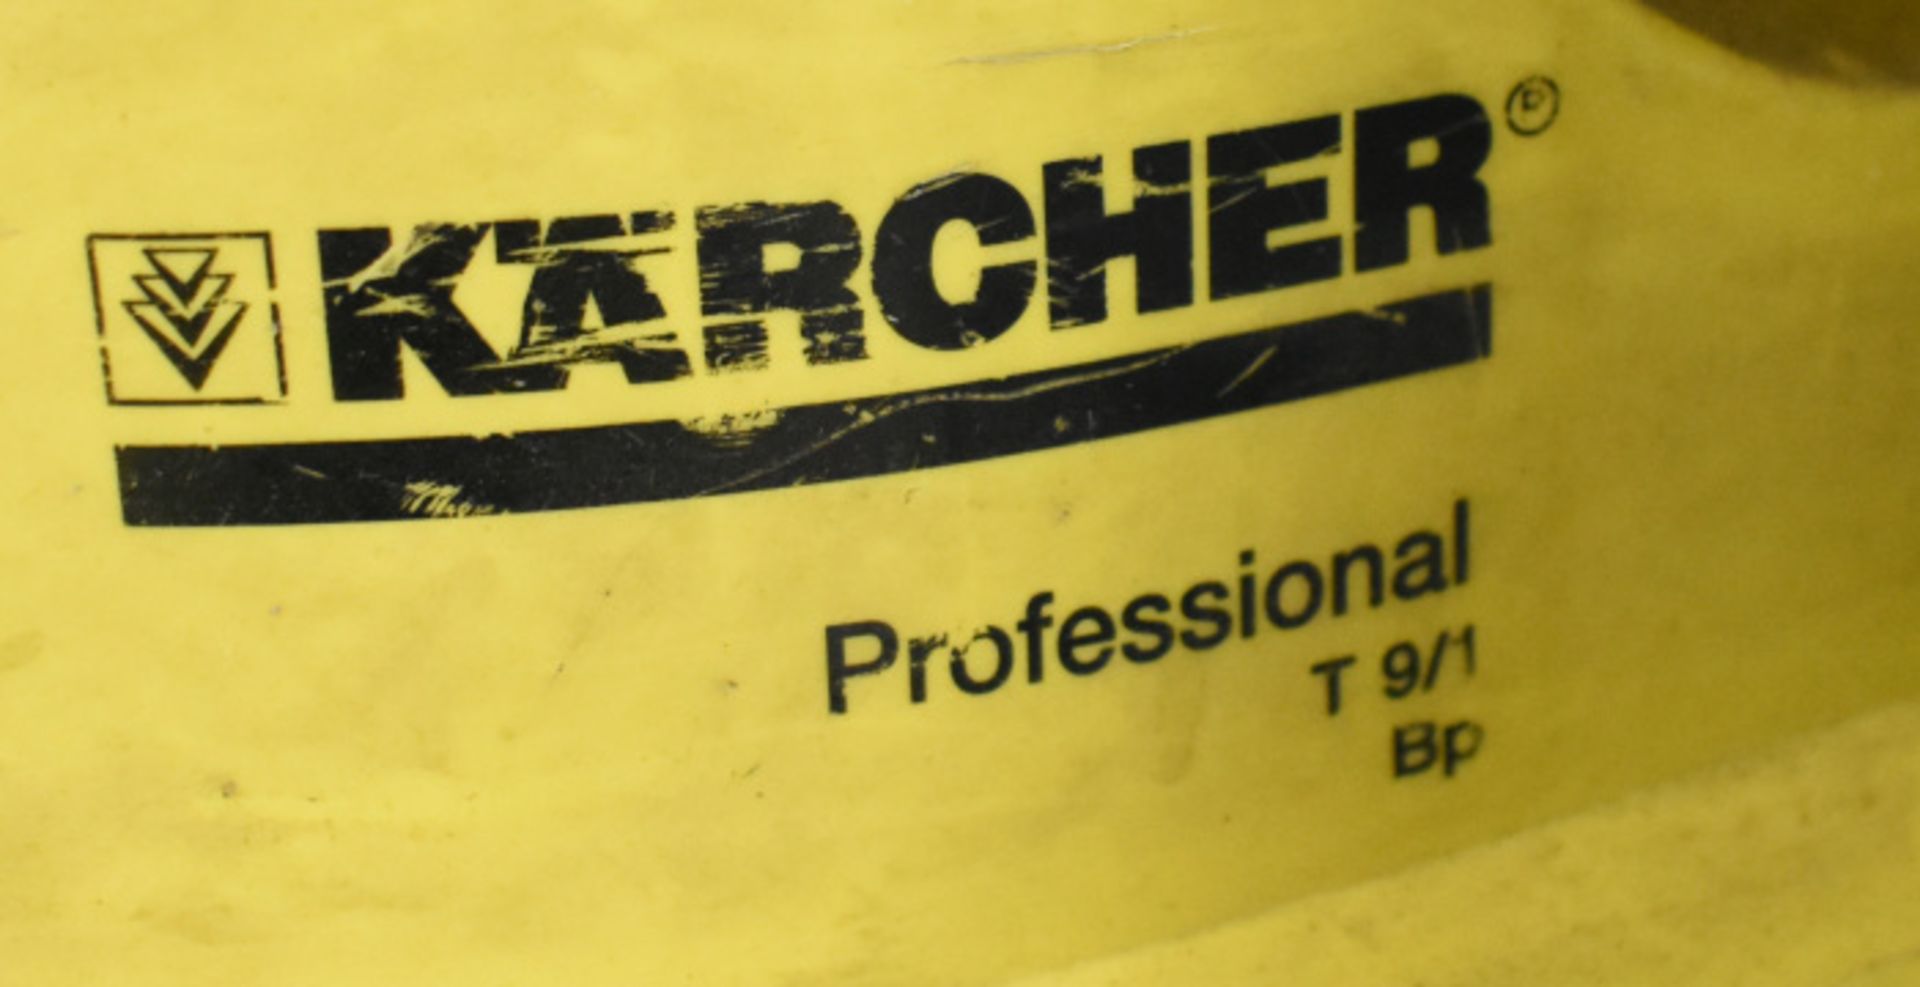 6 x Karcher Proffessional T9/ 1 BP Vacuum Cleaners - Image 3 of 3